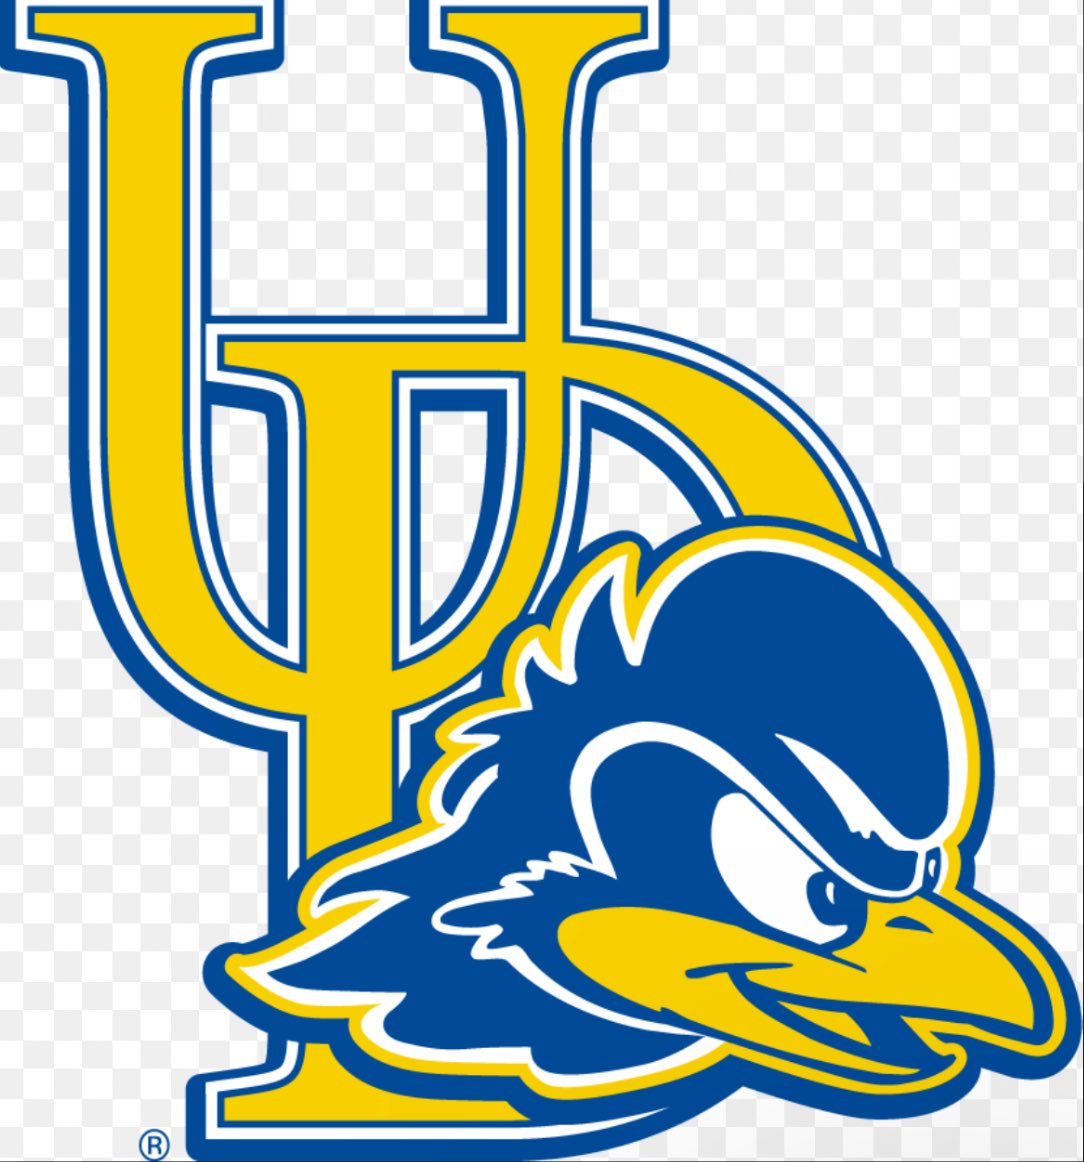 I will be at the university of Delaware today!!!